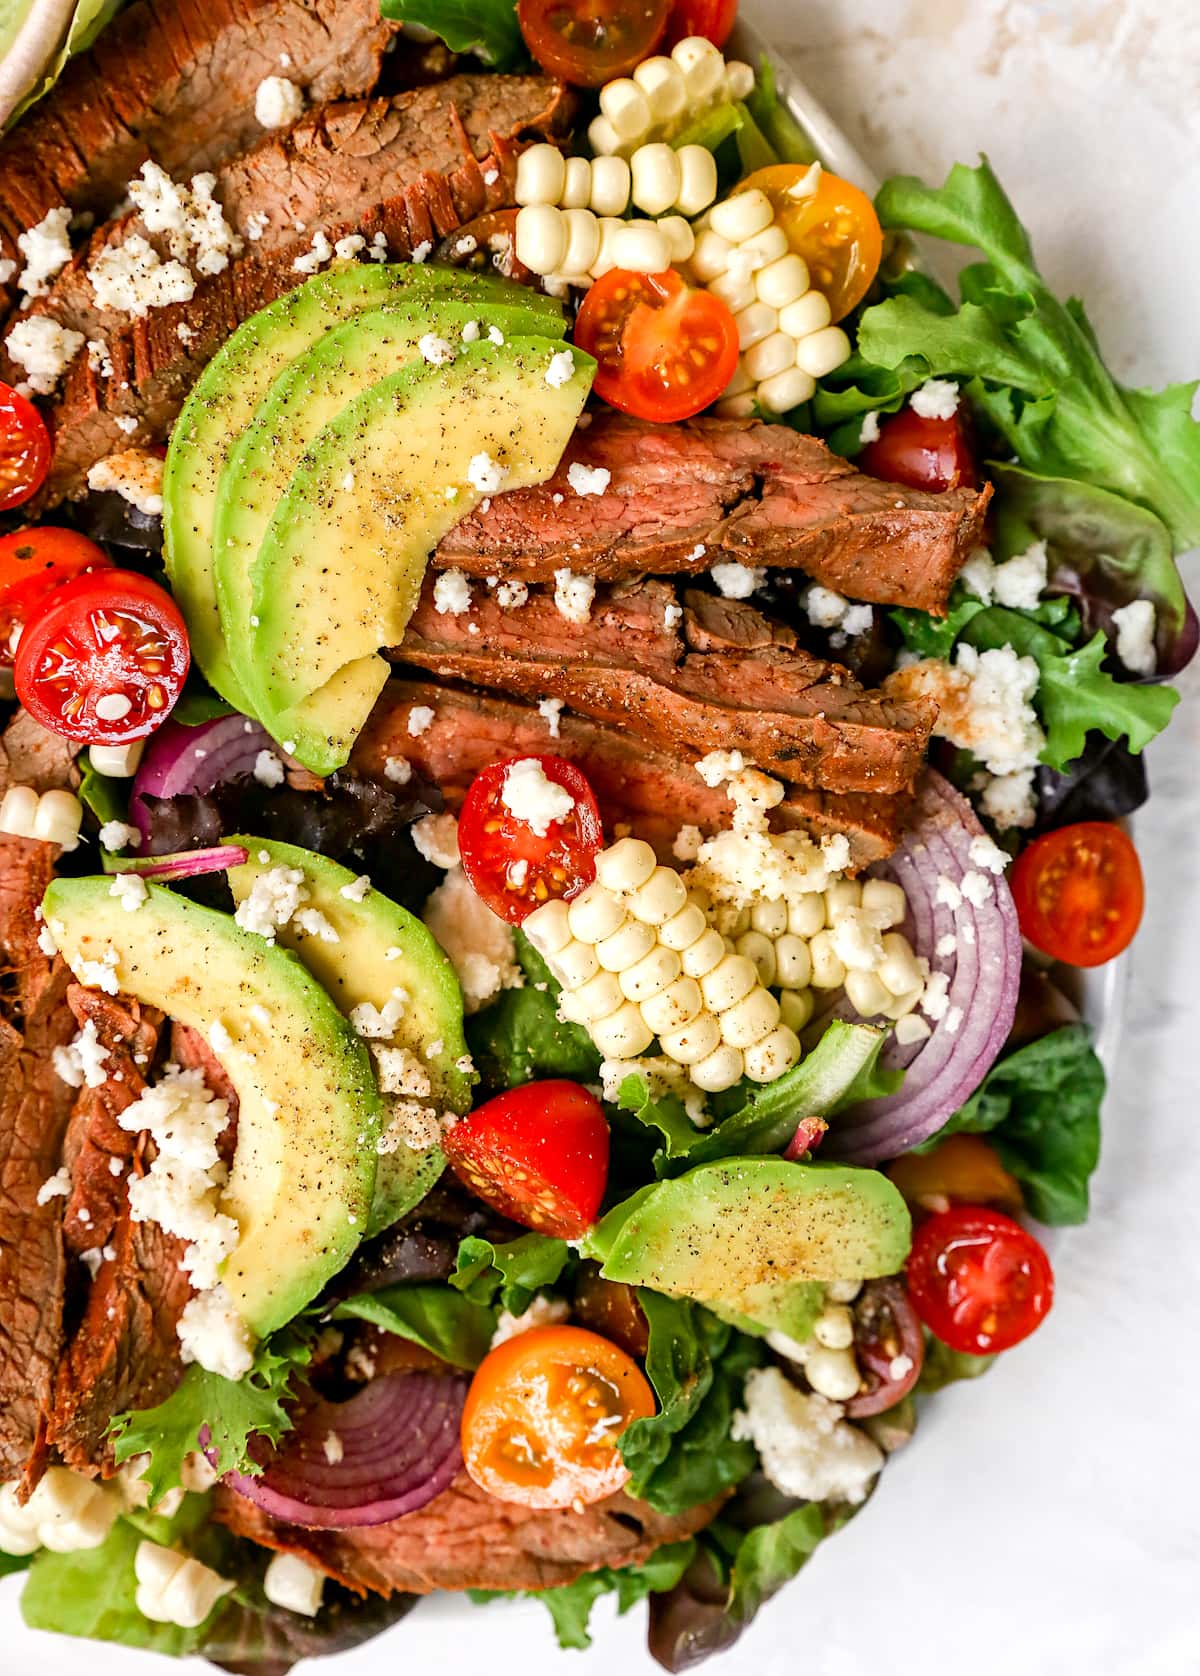 steak salad with avocados, tomatoes, red onion, and corn.